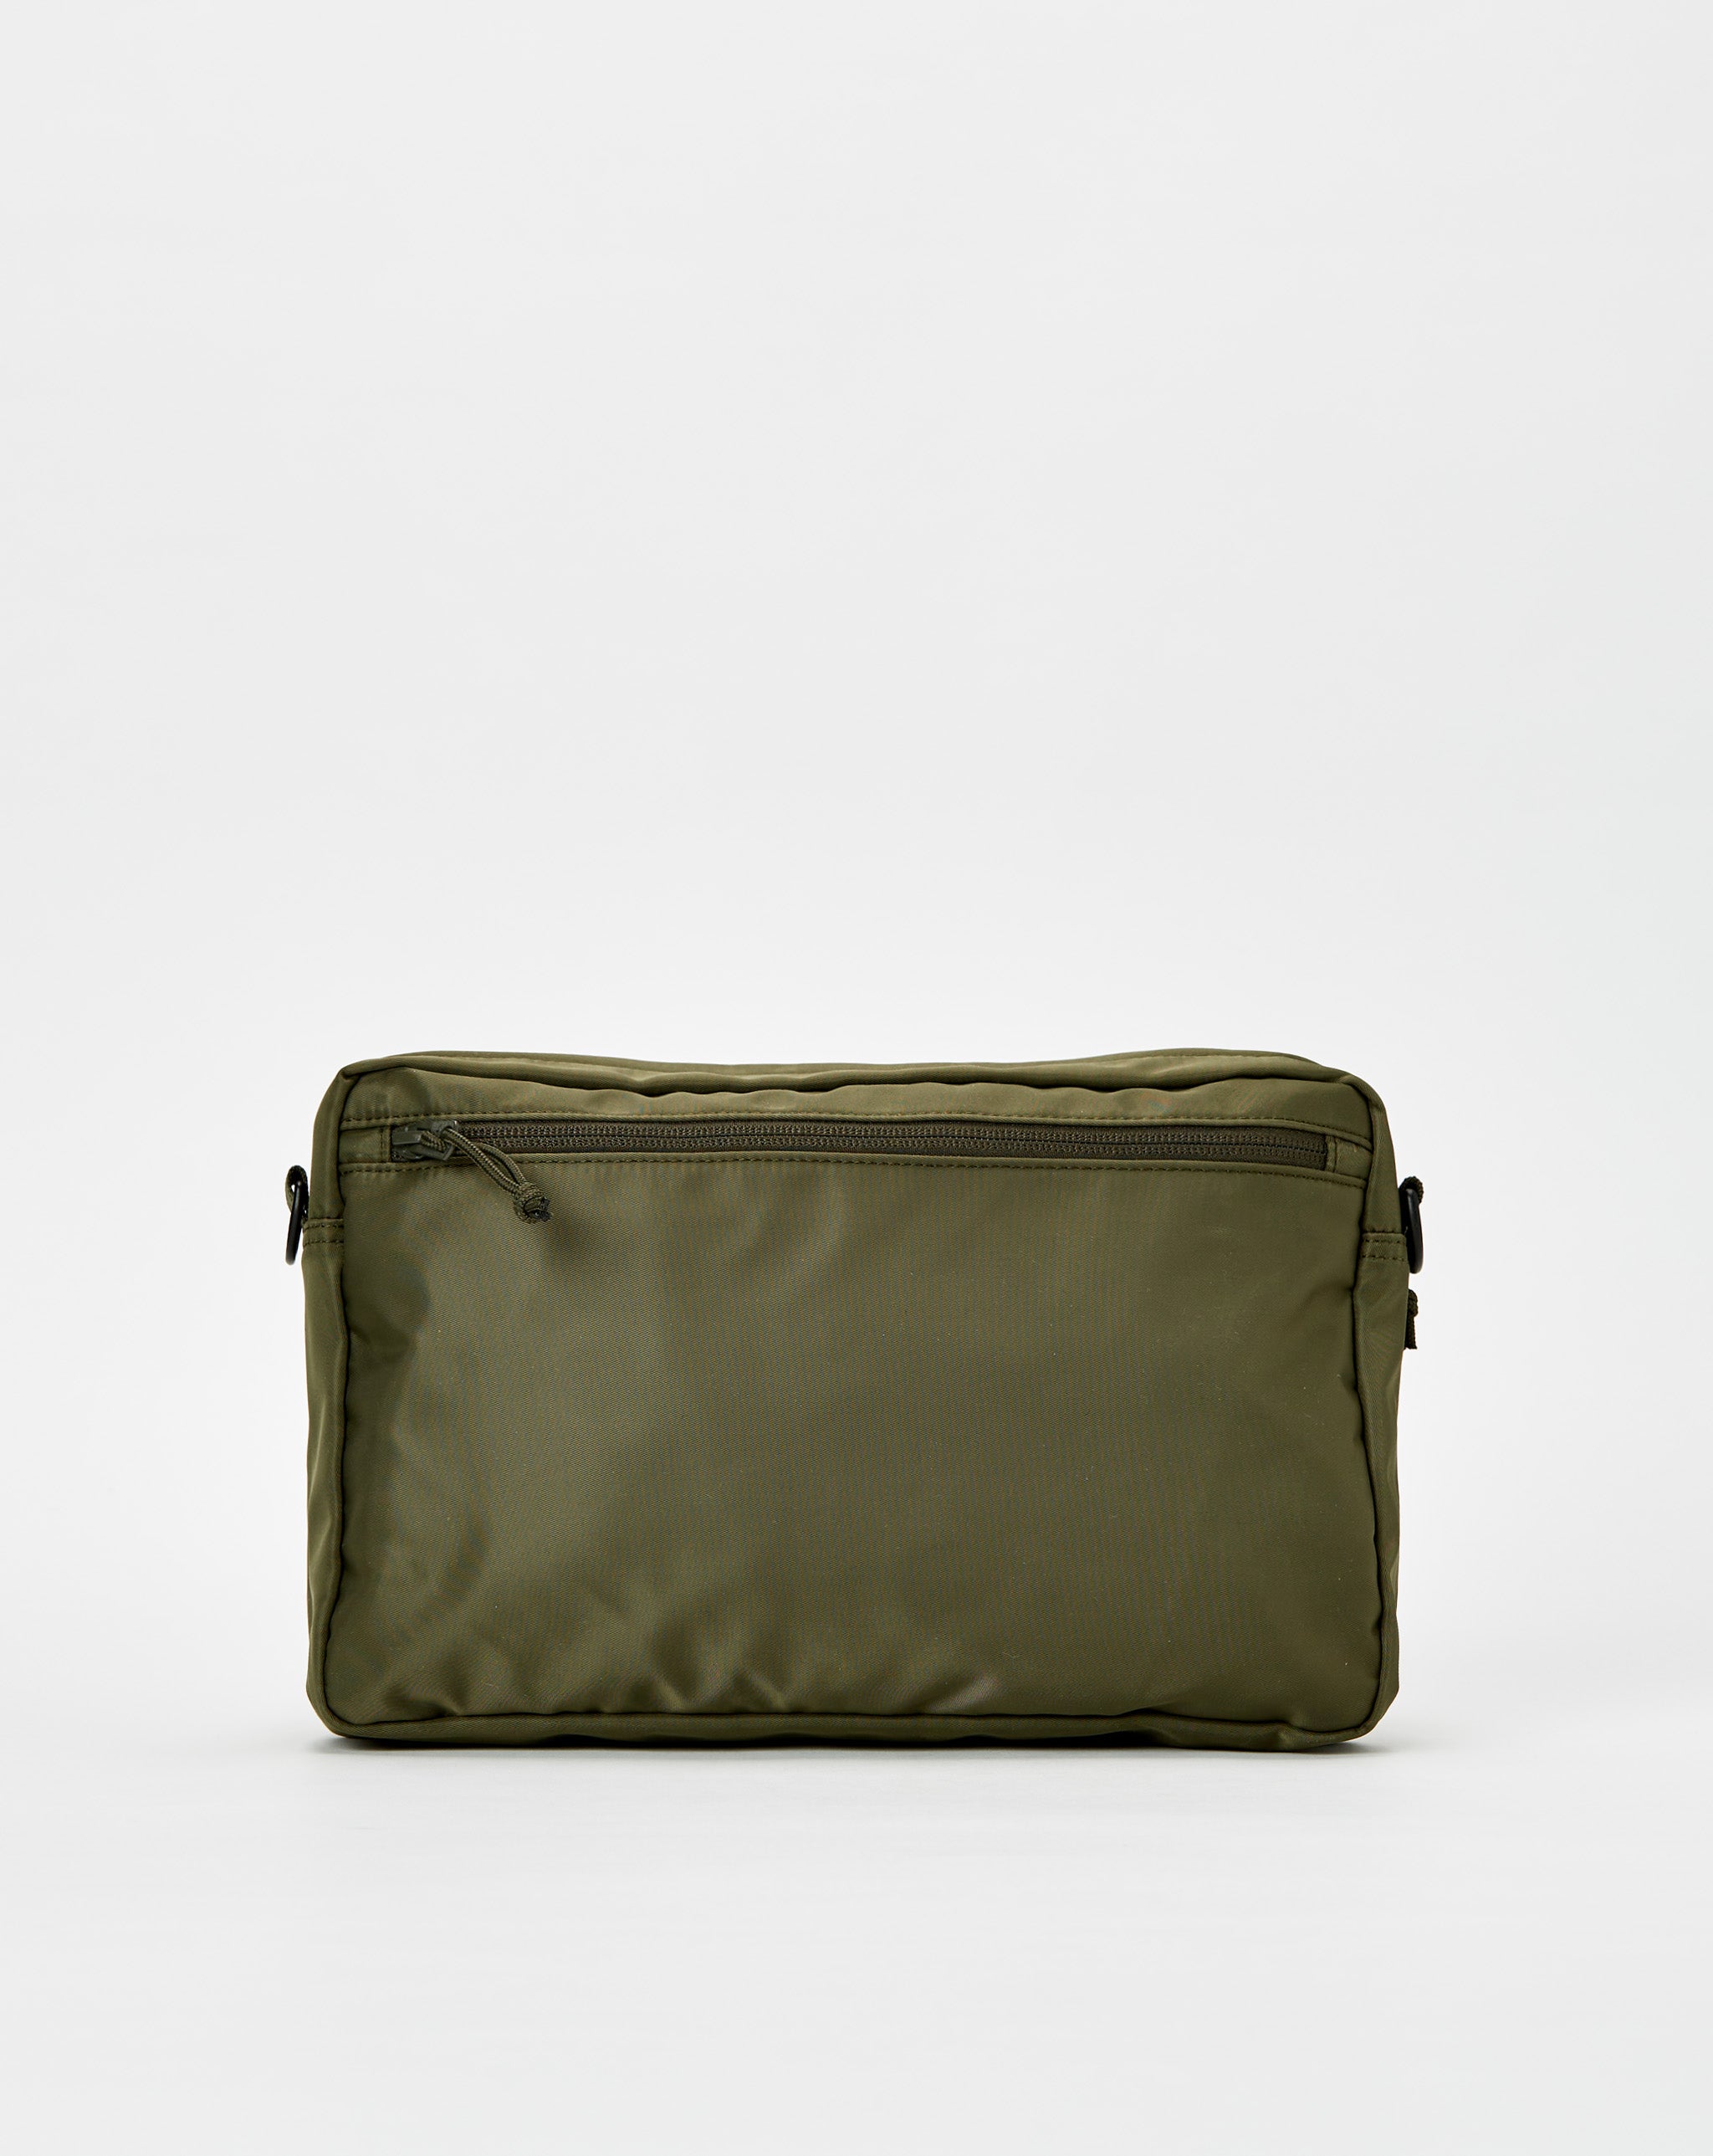 Human Made Military Pouch Large  - Cheap Cerbe Jordan outlet